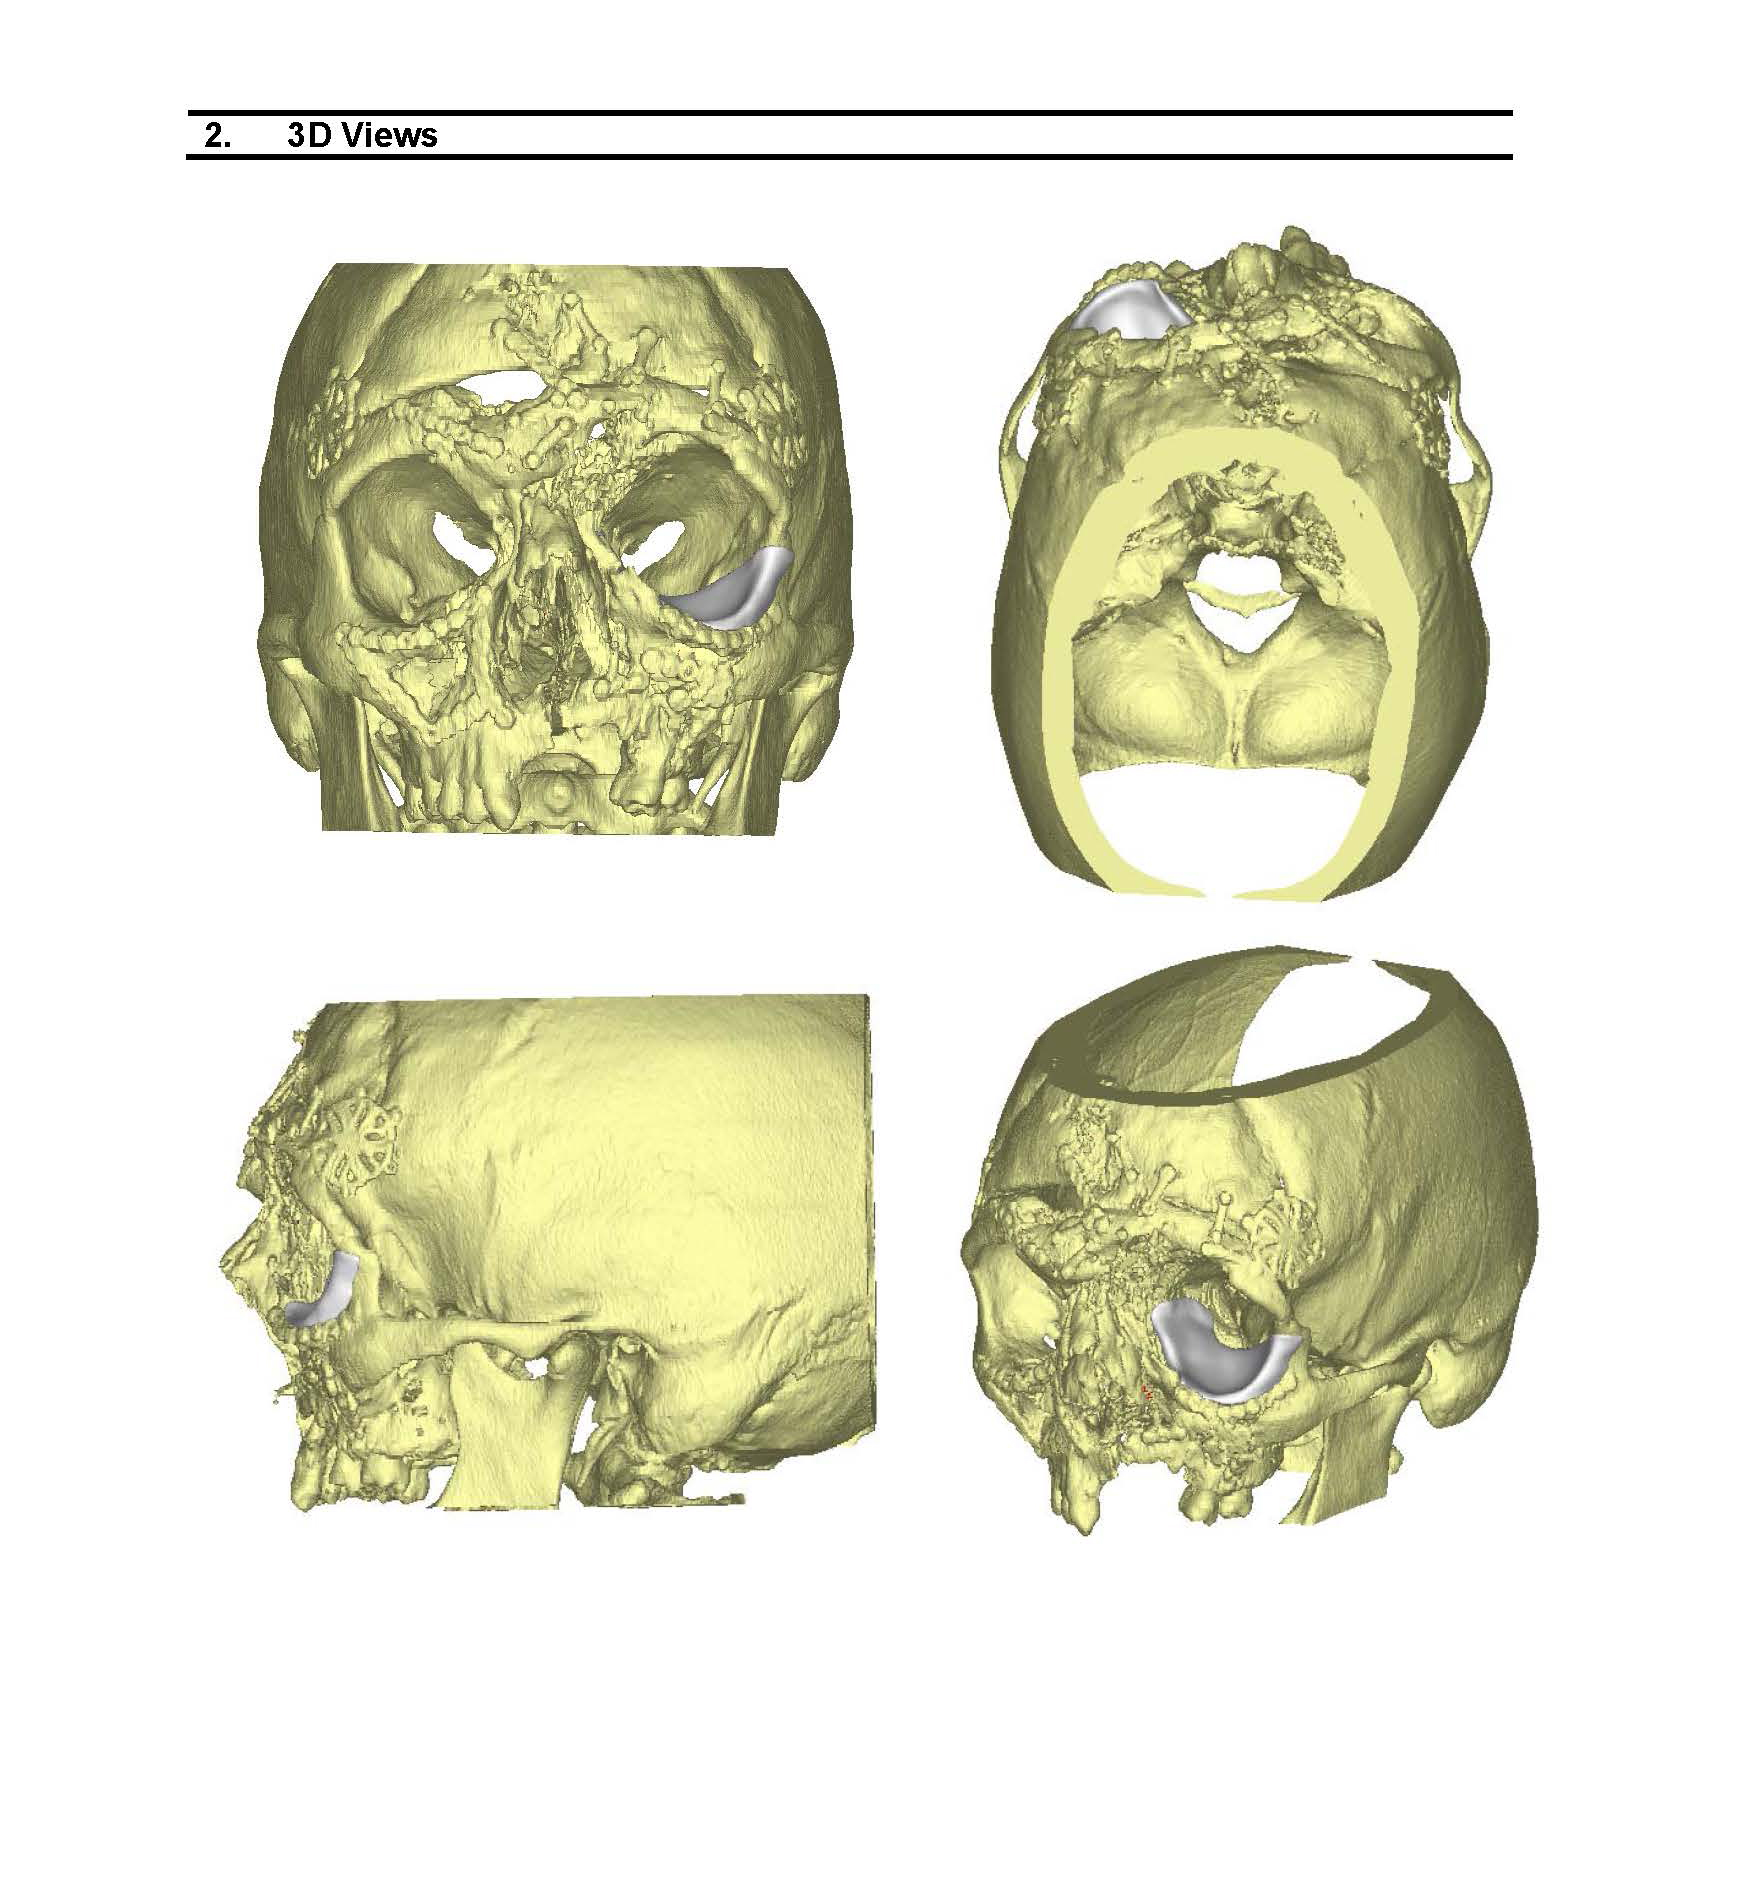 3D views of designs for a customized implant based on computed tomography images of the patient's left eye socket.